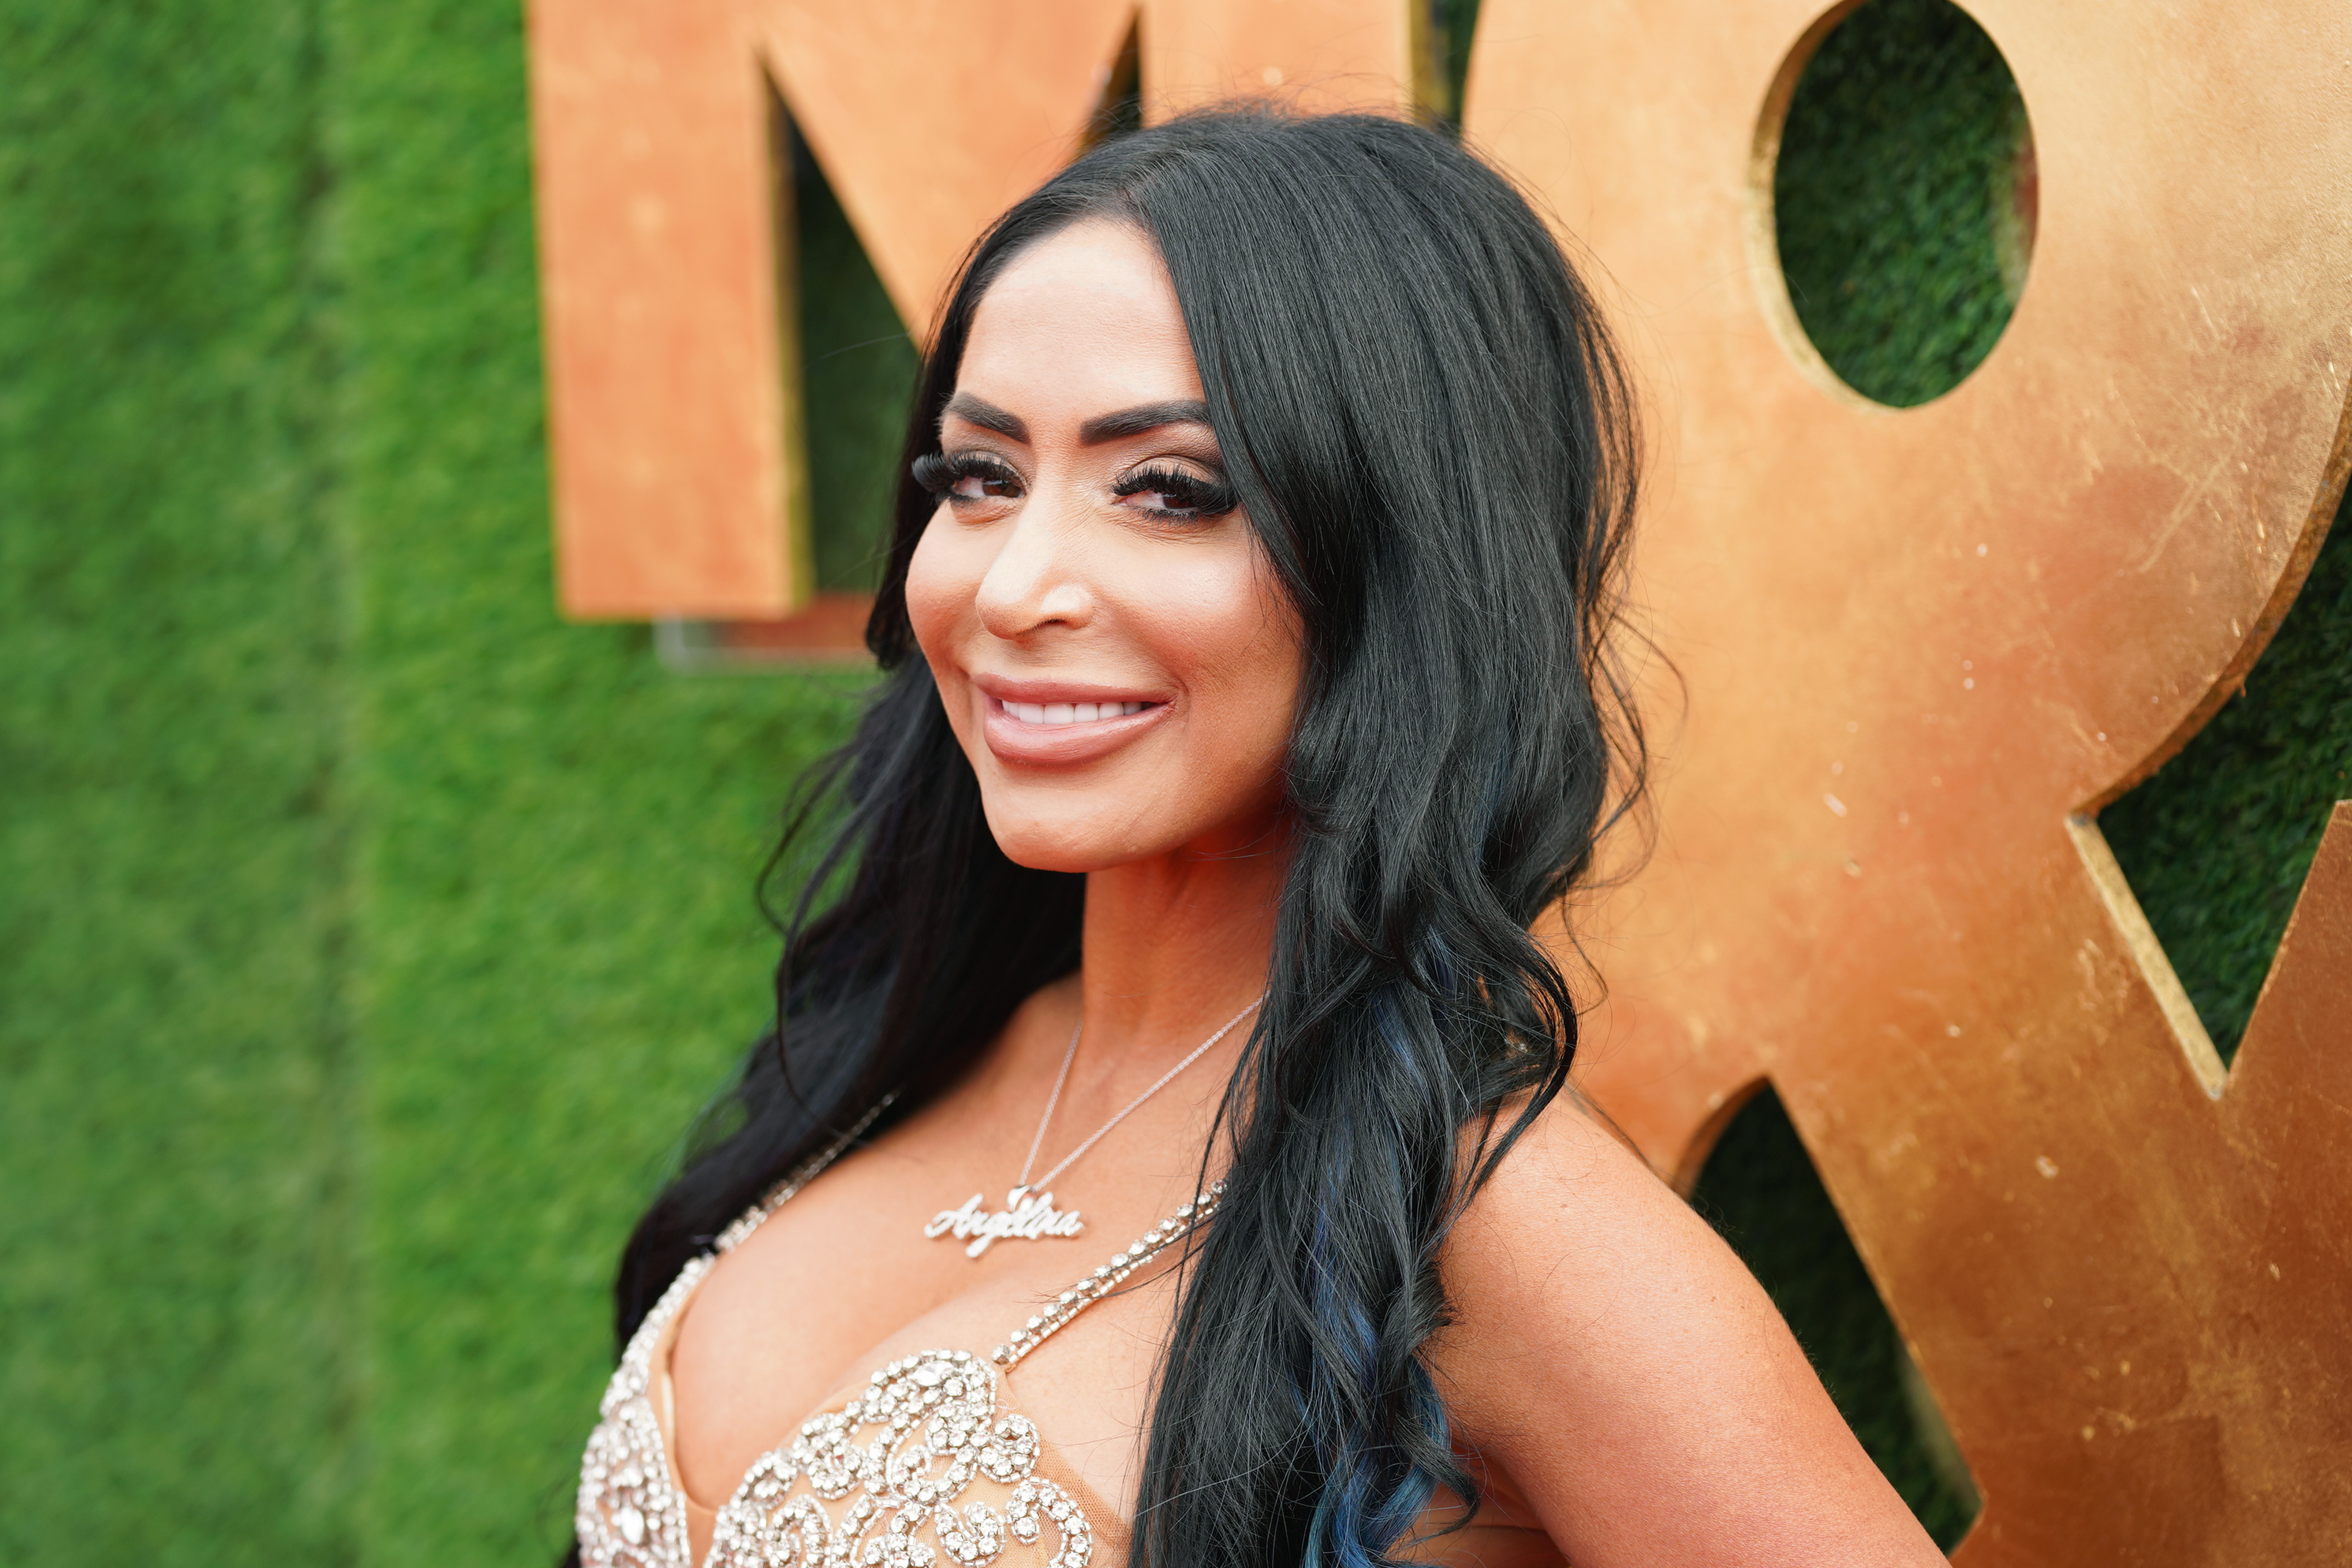 'Jersey Shore' star Angelina Pivarnick, who claims 'Jersey Shore 2.0' has been cancelled